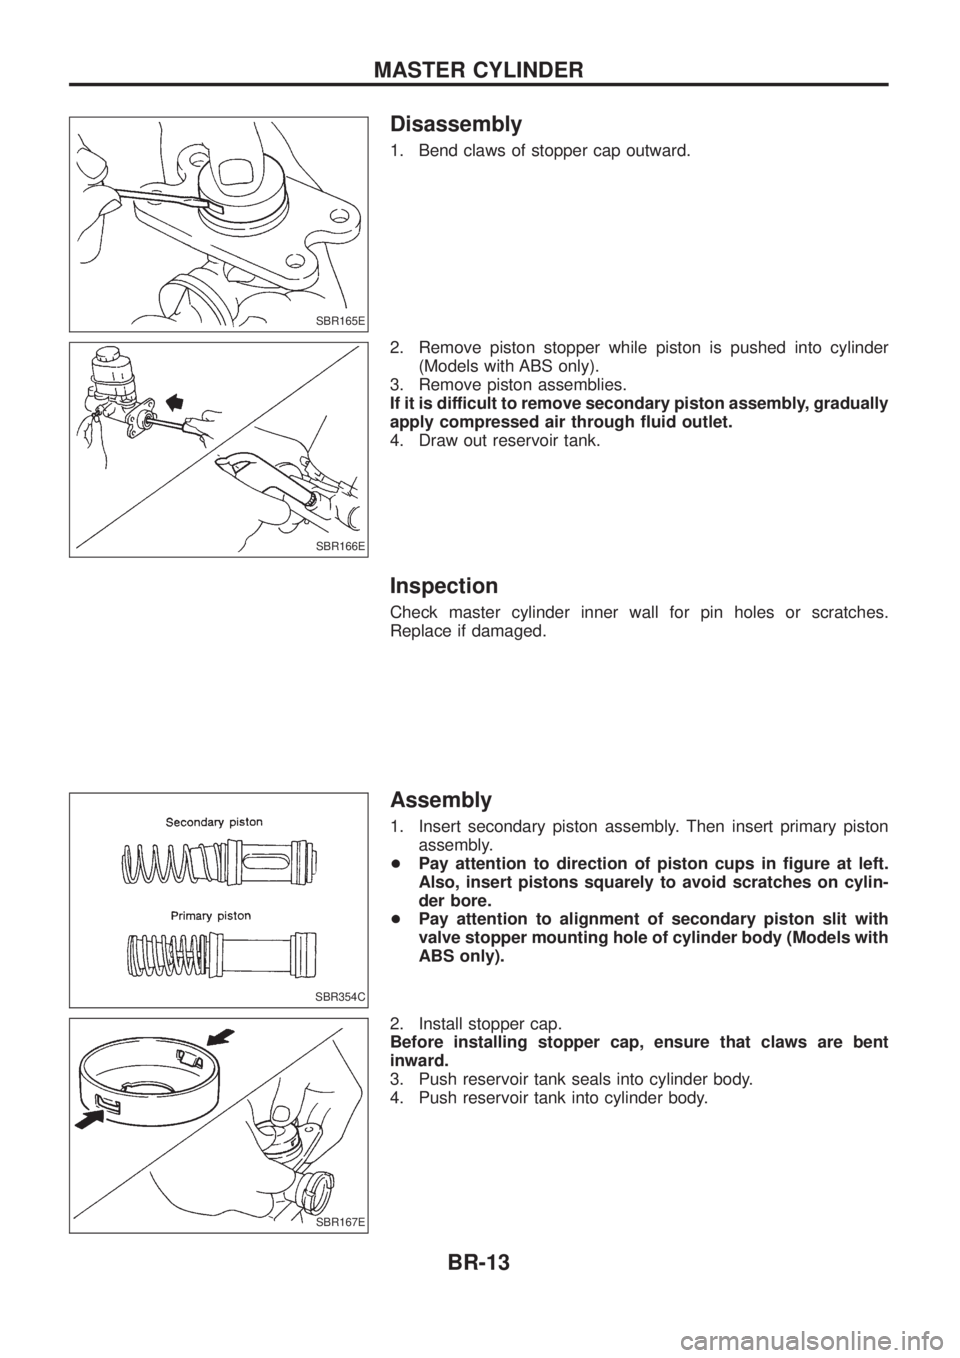 NISSAN PATROL 2006  Service Manual Disassembly
1. Bend claws of stopper cap outward.
2. Remove piston stopper while piston is pushed into cylinder(Models with ABS only).
3. Remove piston assemblies.
If it is difficult to remove seconda